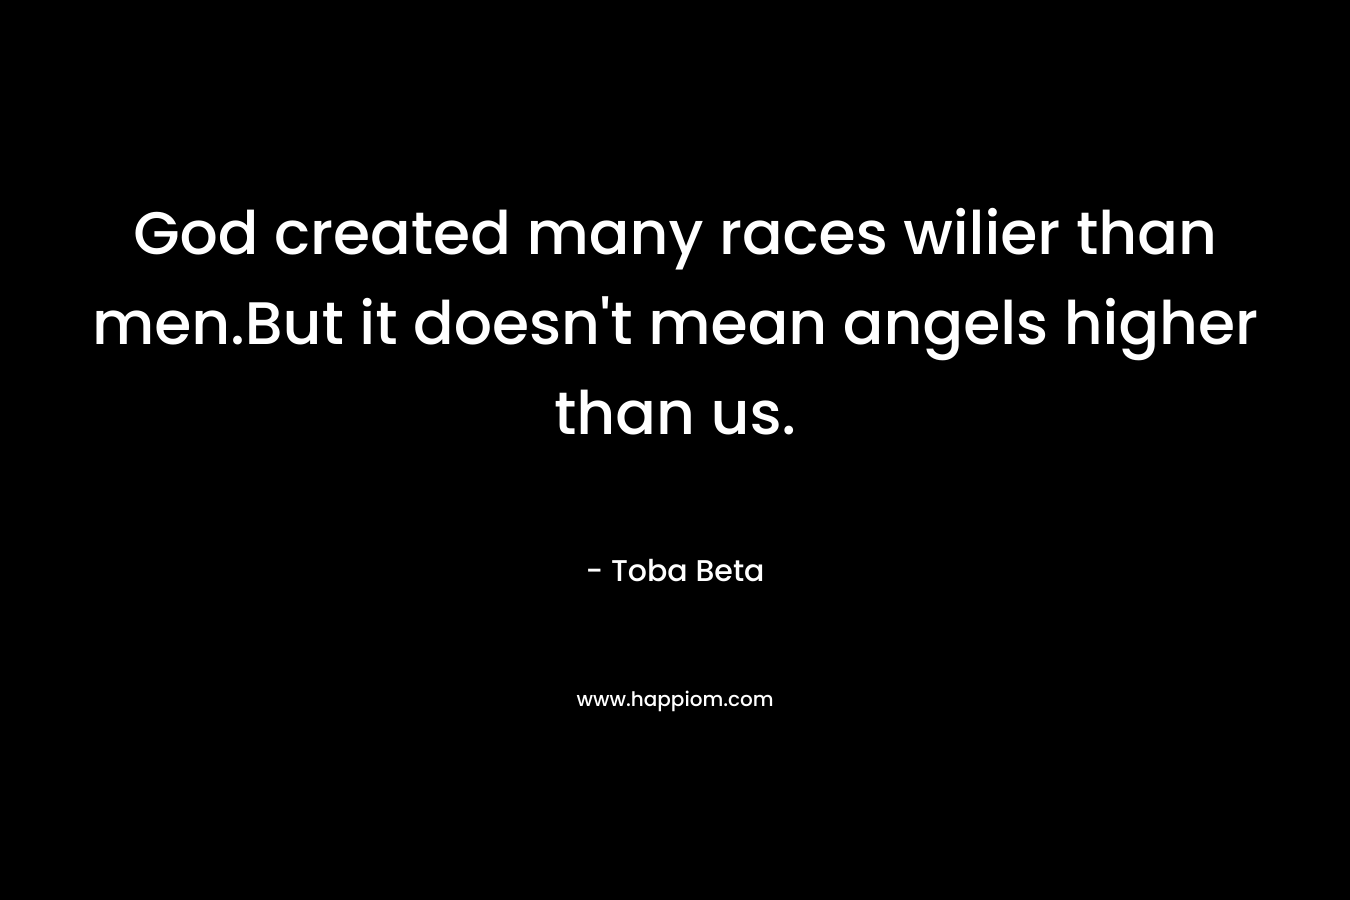 God created many races wilier than men.But it doesn't mean angels higher than us.